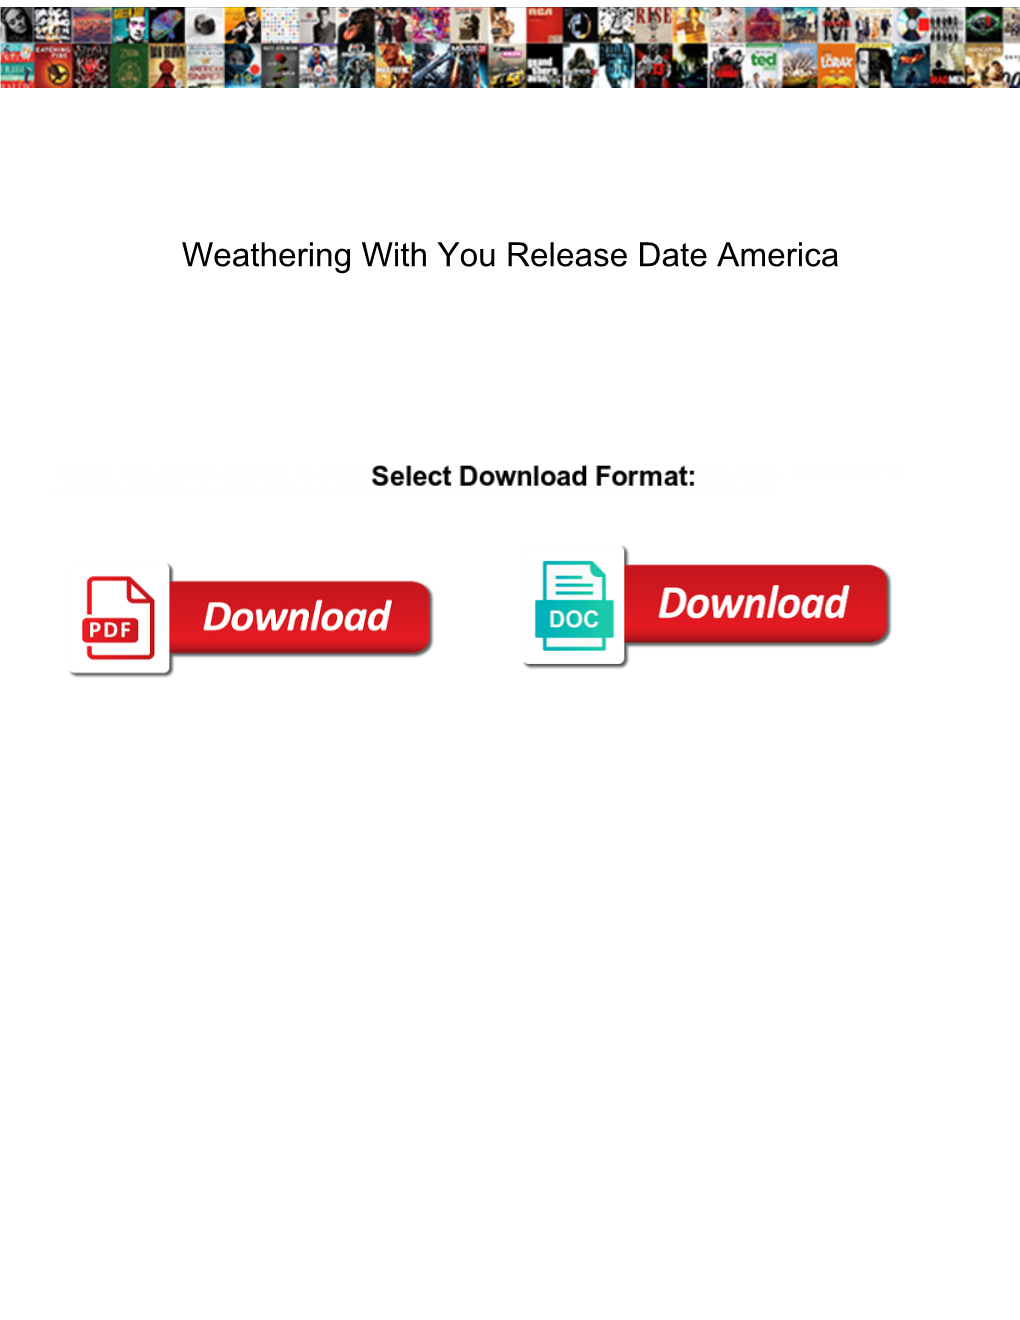 Weathering with You Release Date America